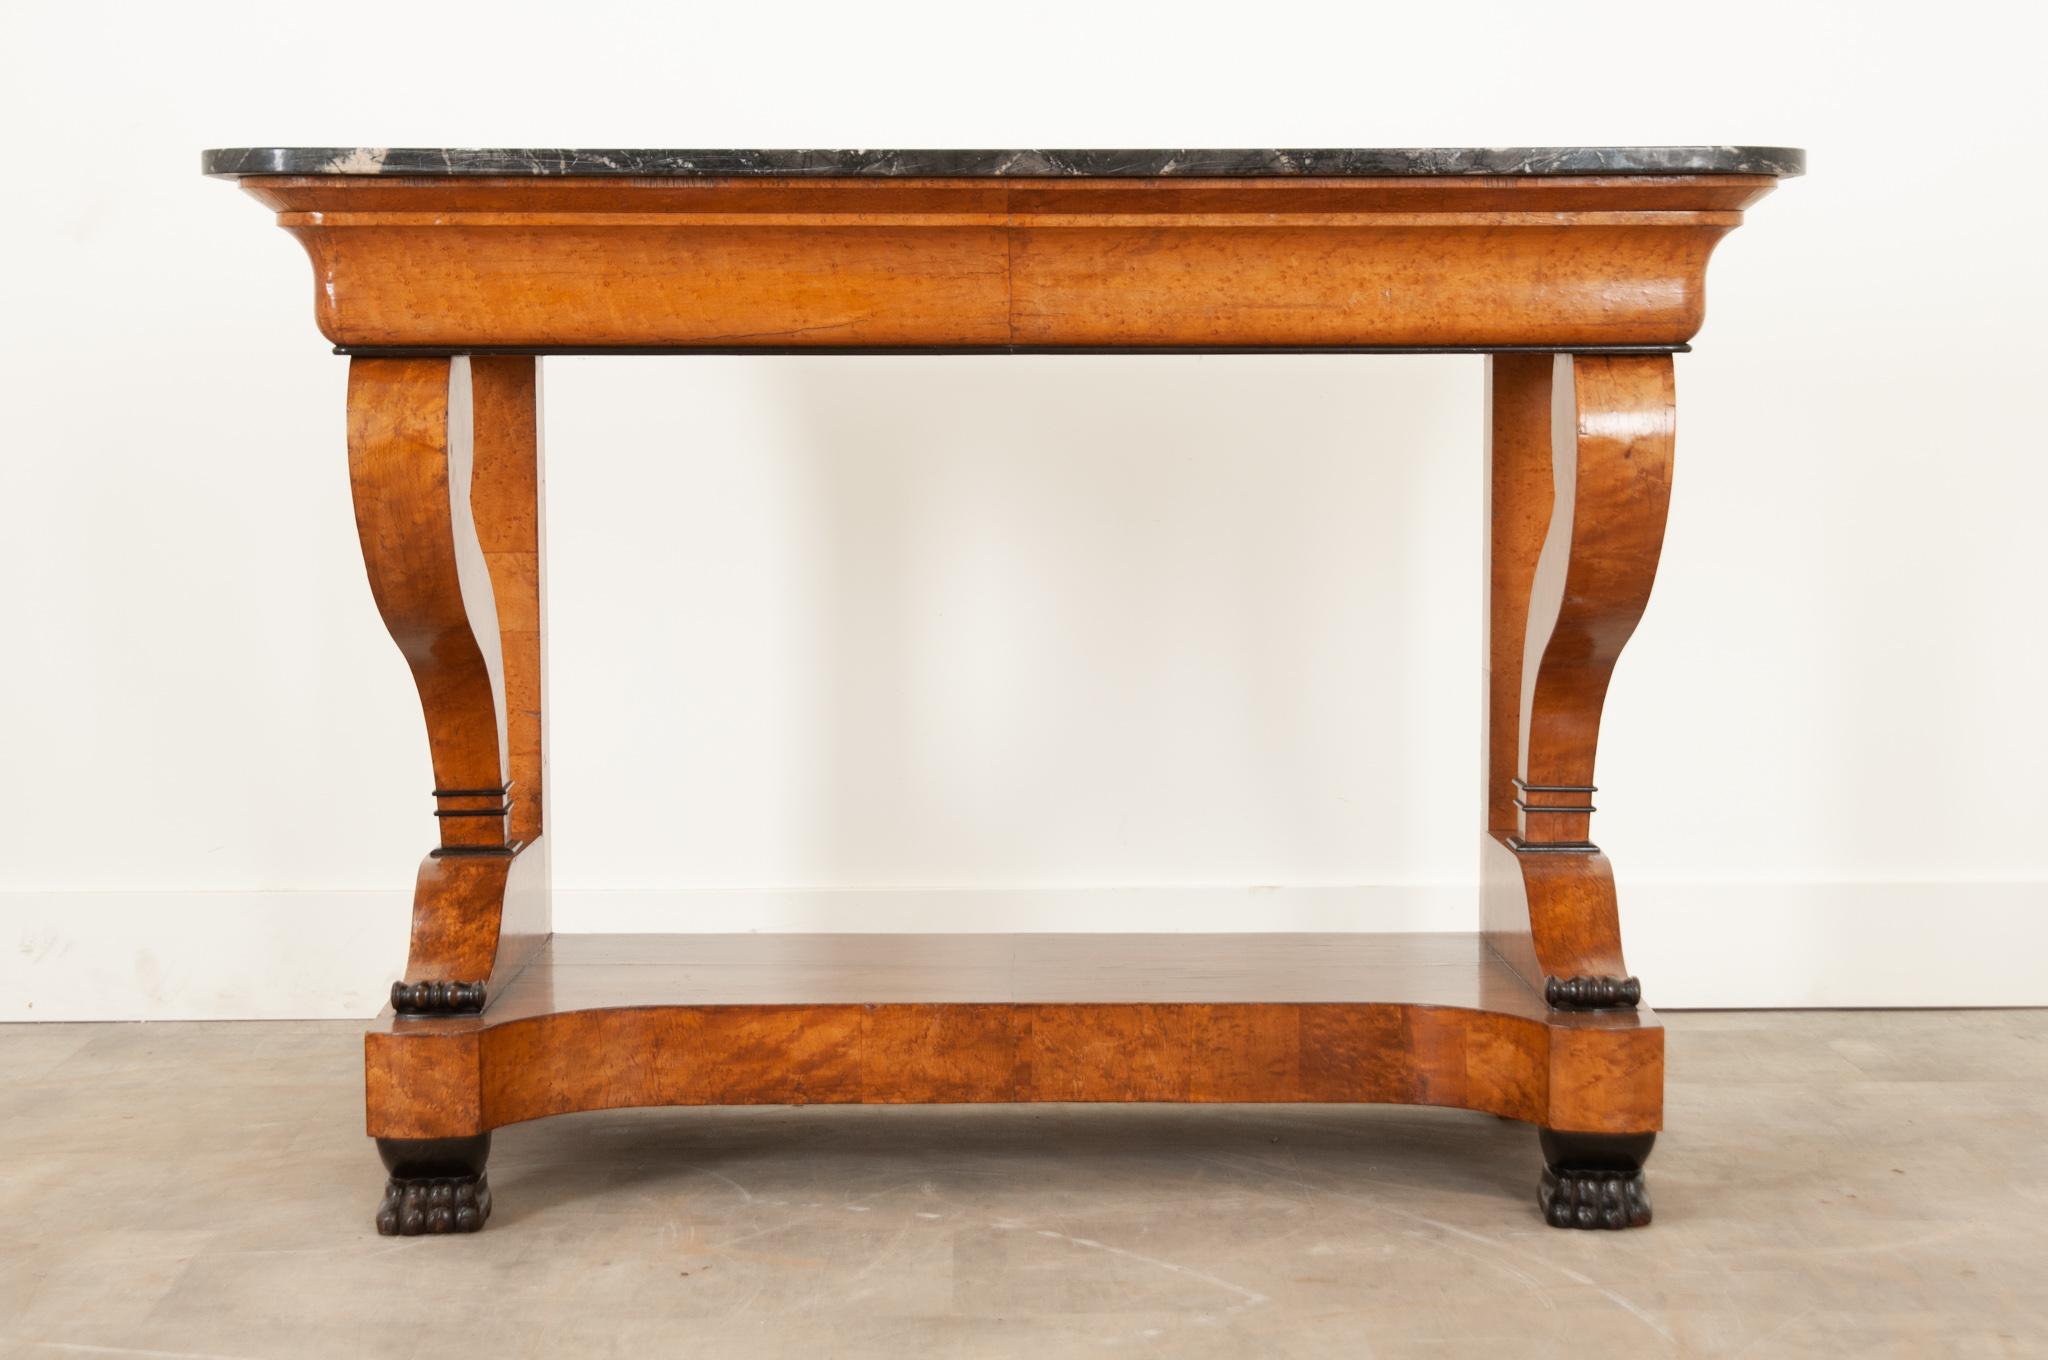 A elegant and large scale restoration console with a beautiful shaped black and white piece of marble. The top elegantly cantilevers over its base and is classic of the Restoration period. Thick burl birch veneer has a warm honey coloring and